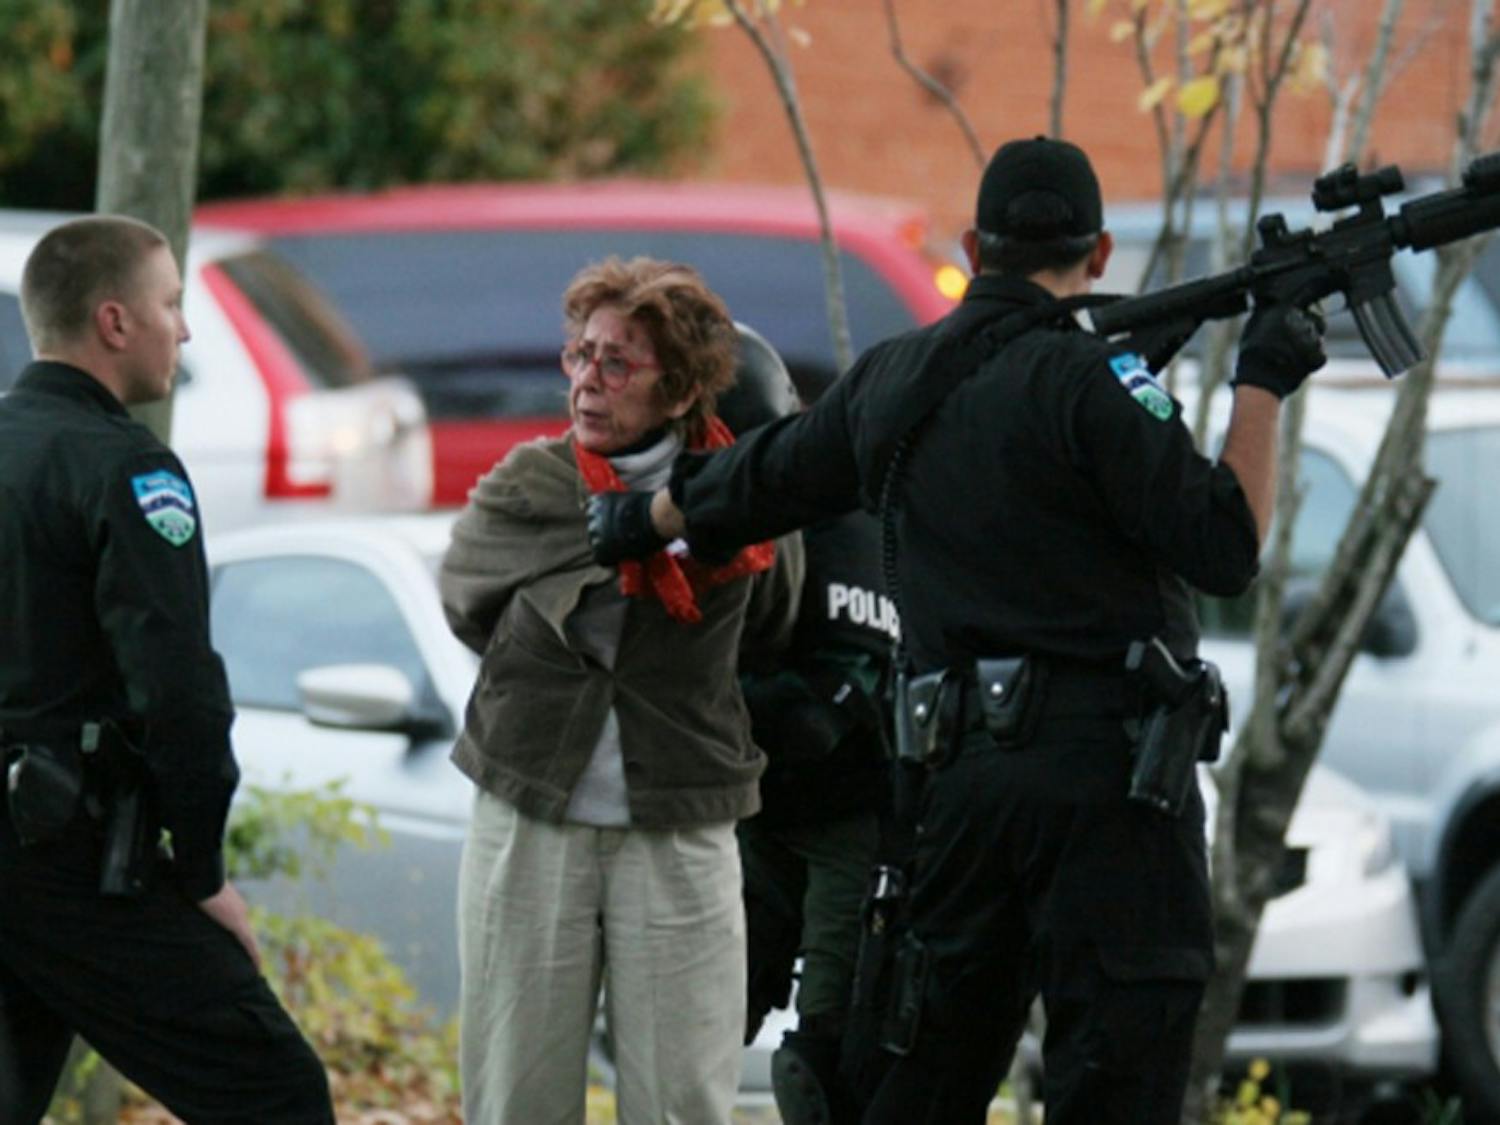 	A woman was arrested by Chapel Hill police on November 13, 2011 in front of the old Chrysler Building on West Franklin Street.